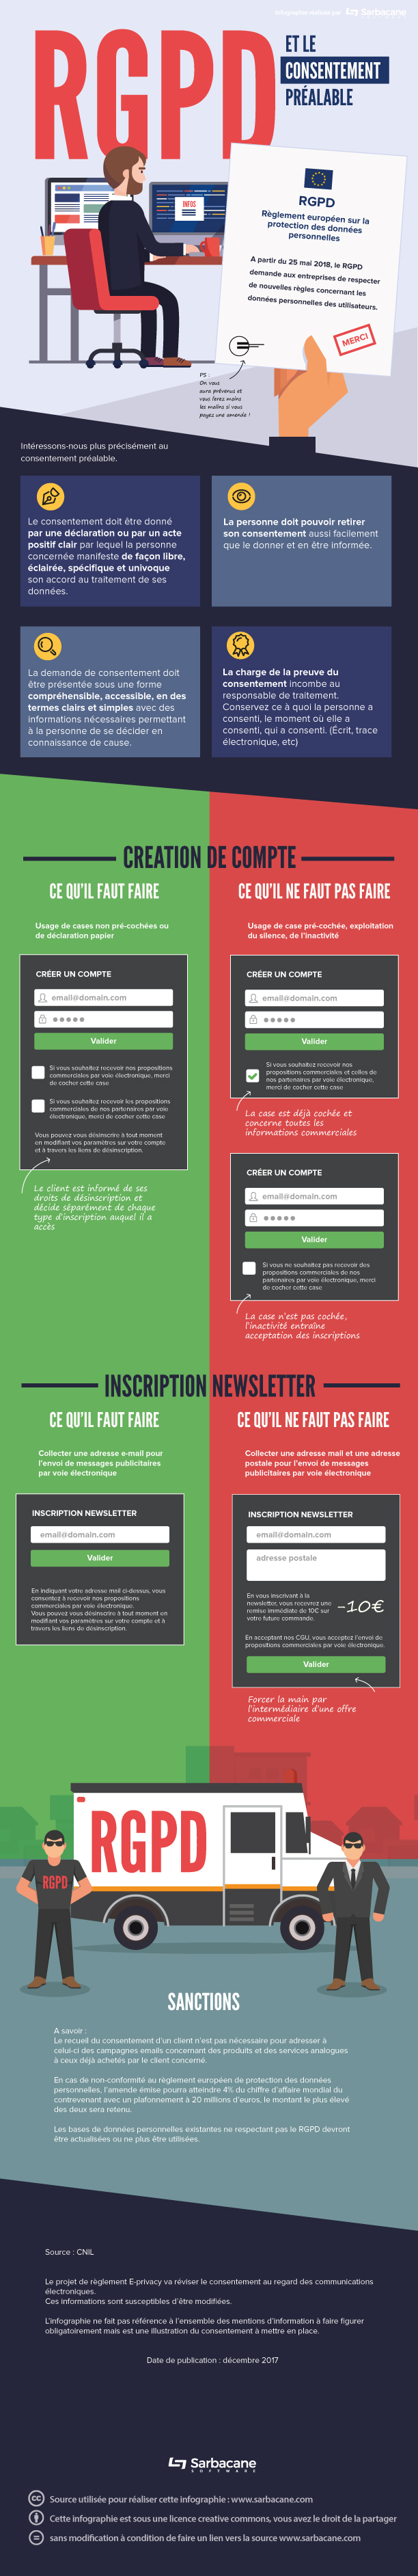 infographie RGPD emailing